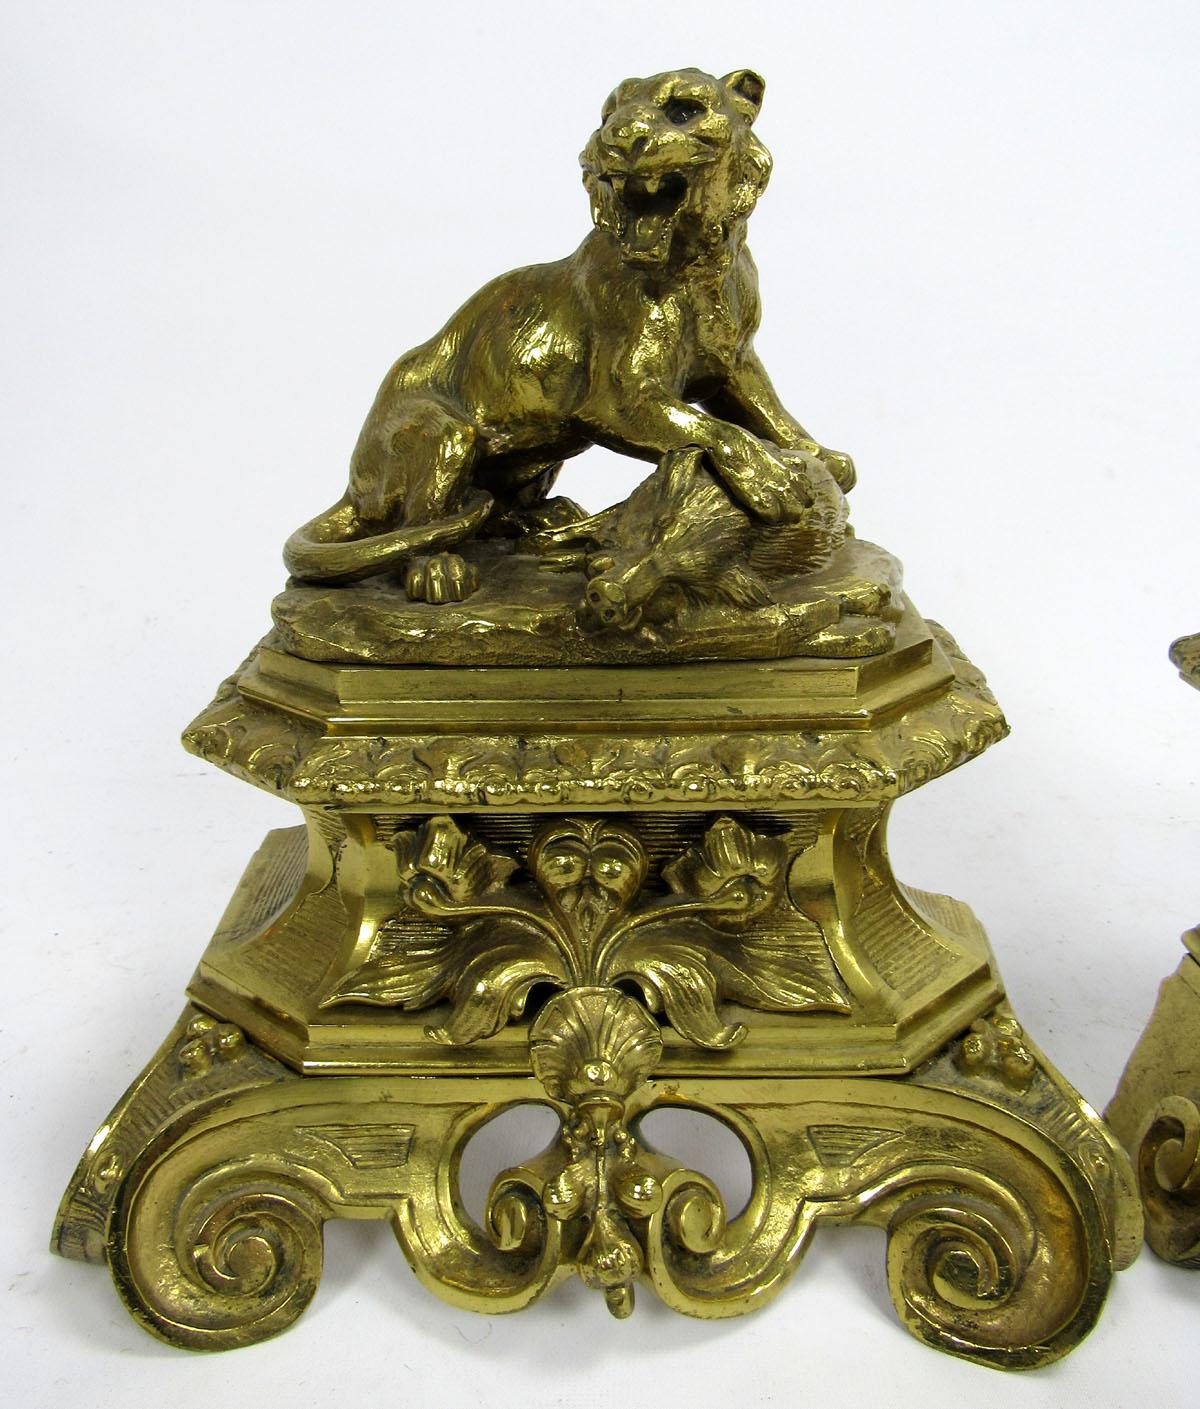 Antique bronze doré figural fire dogs featuring a lion and lioness with their prey.